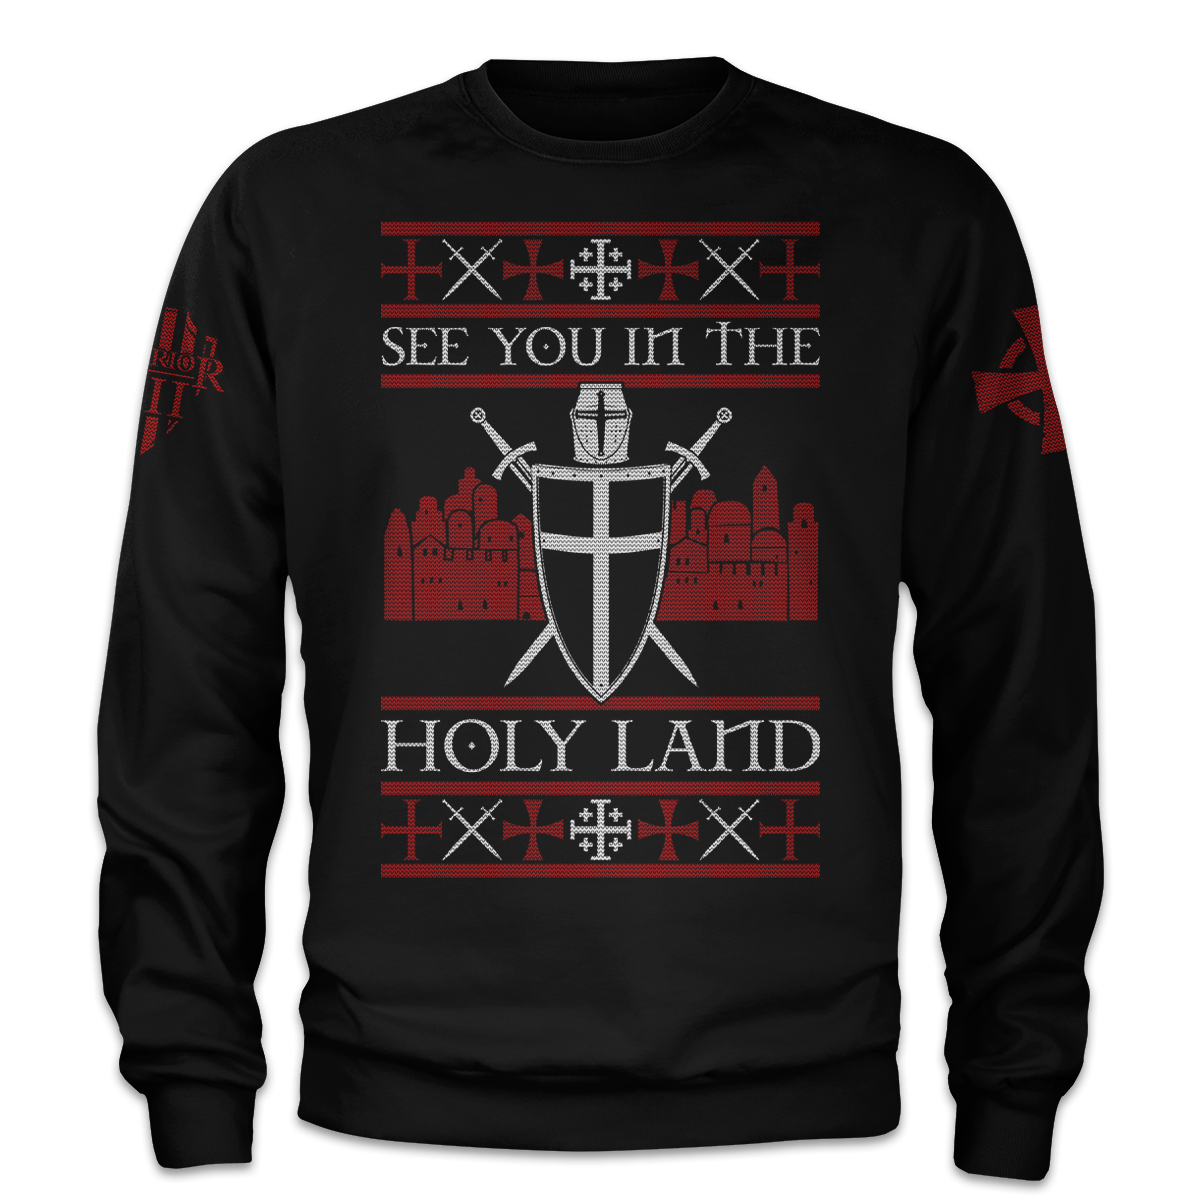 Black Crusader Christmas Sweater with the words "See You In The Holy Land" printed on the front.